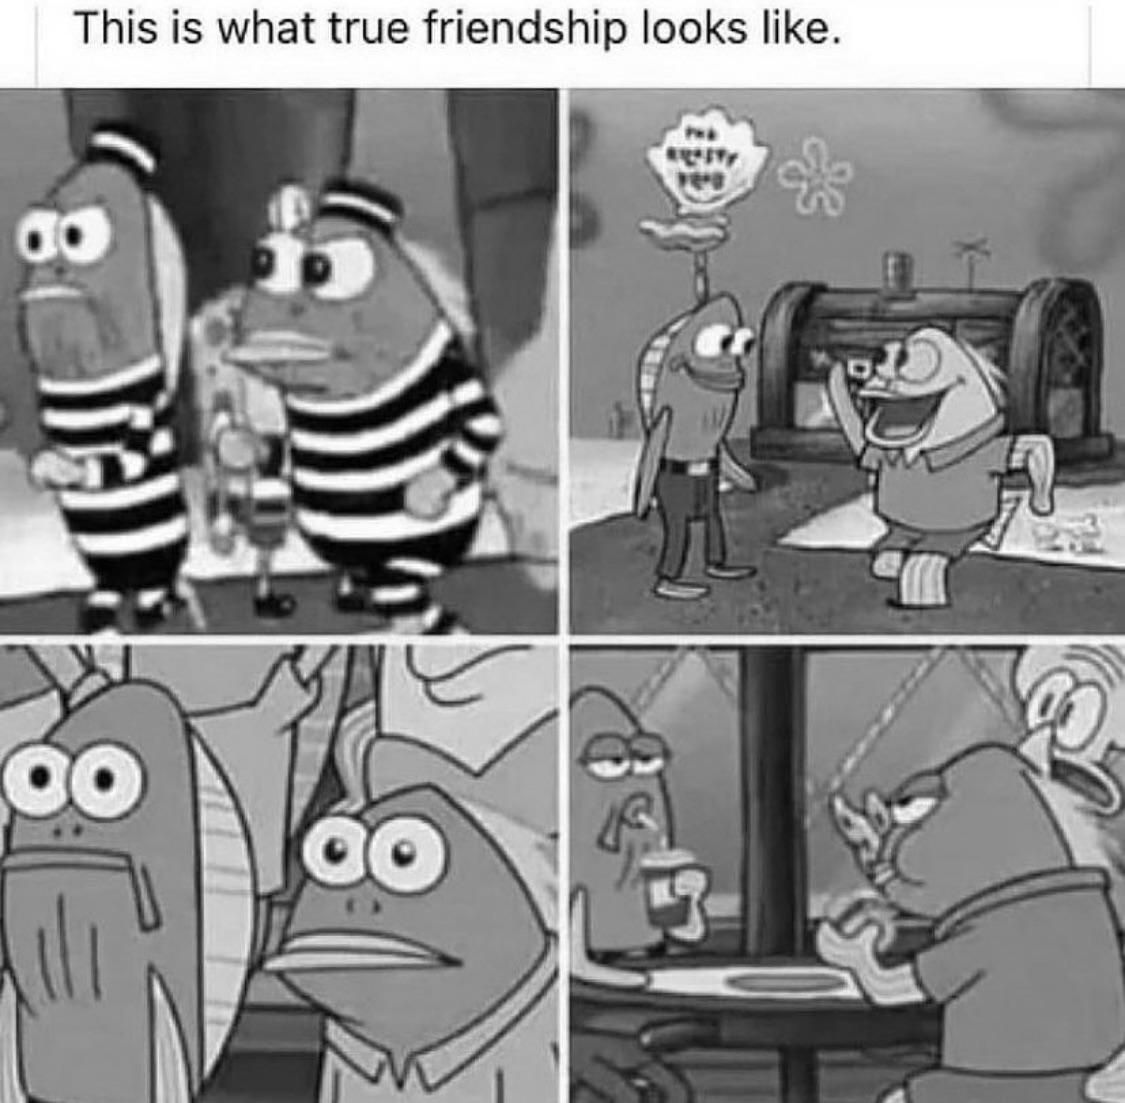 Real friendship.